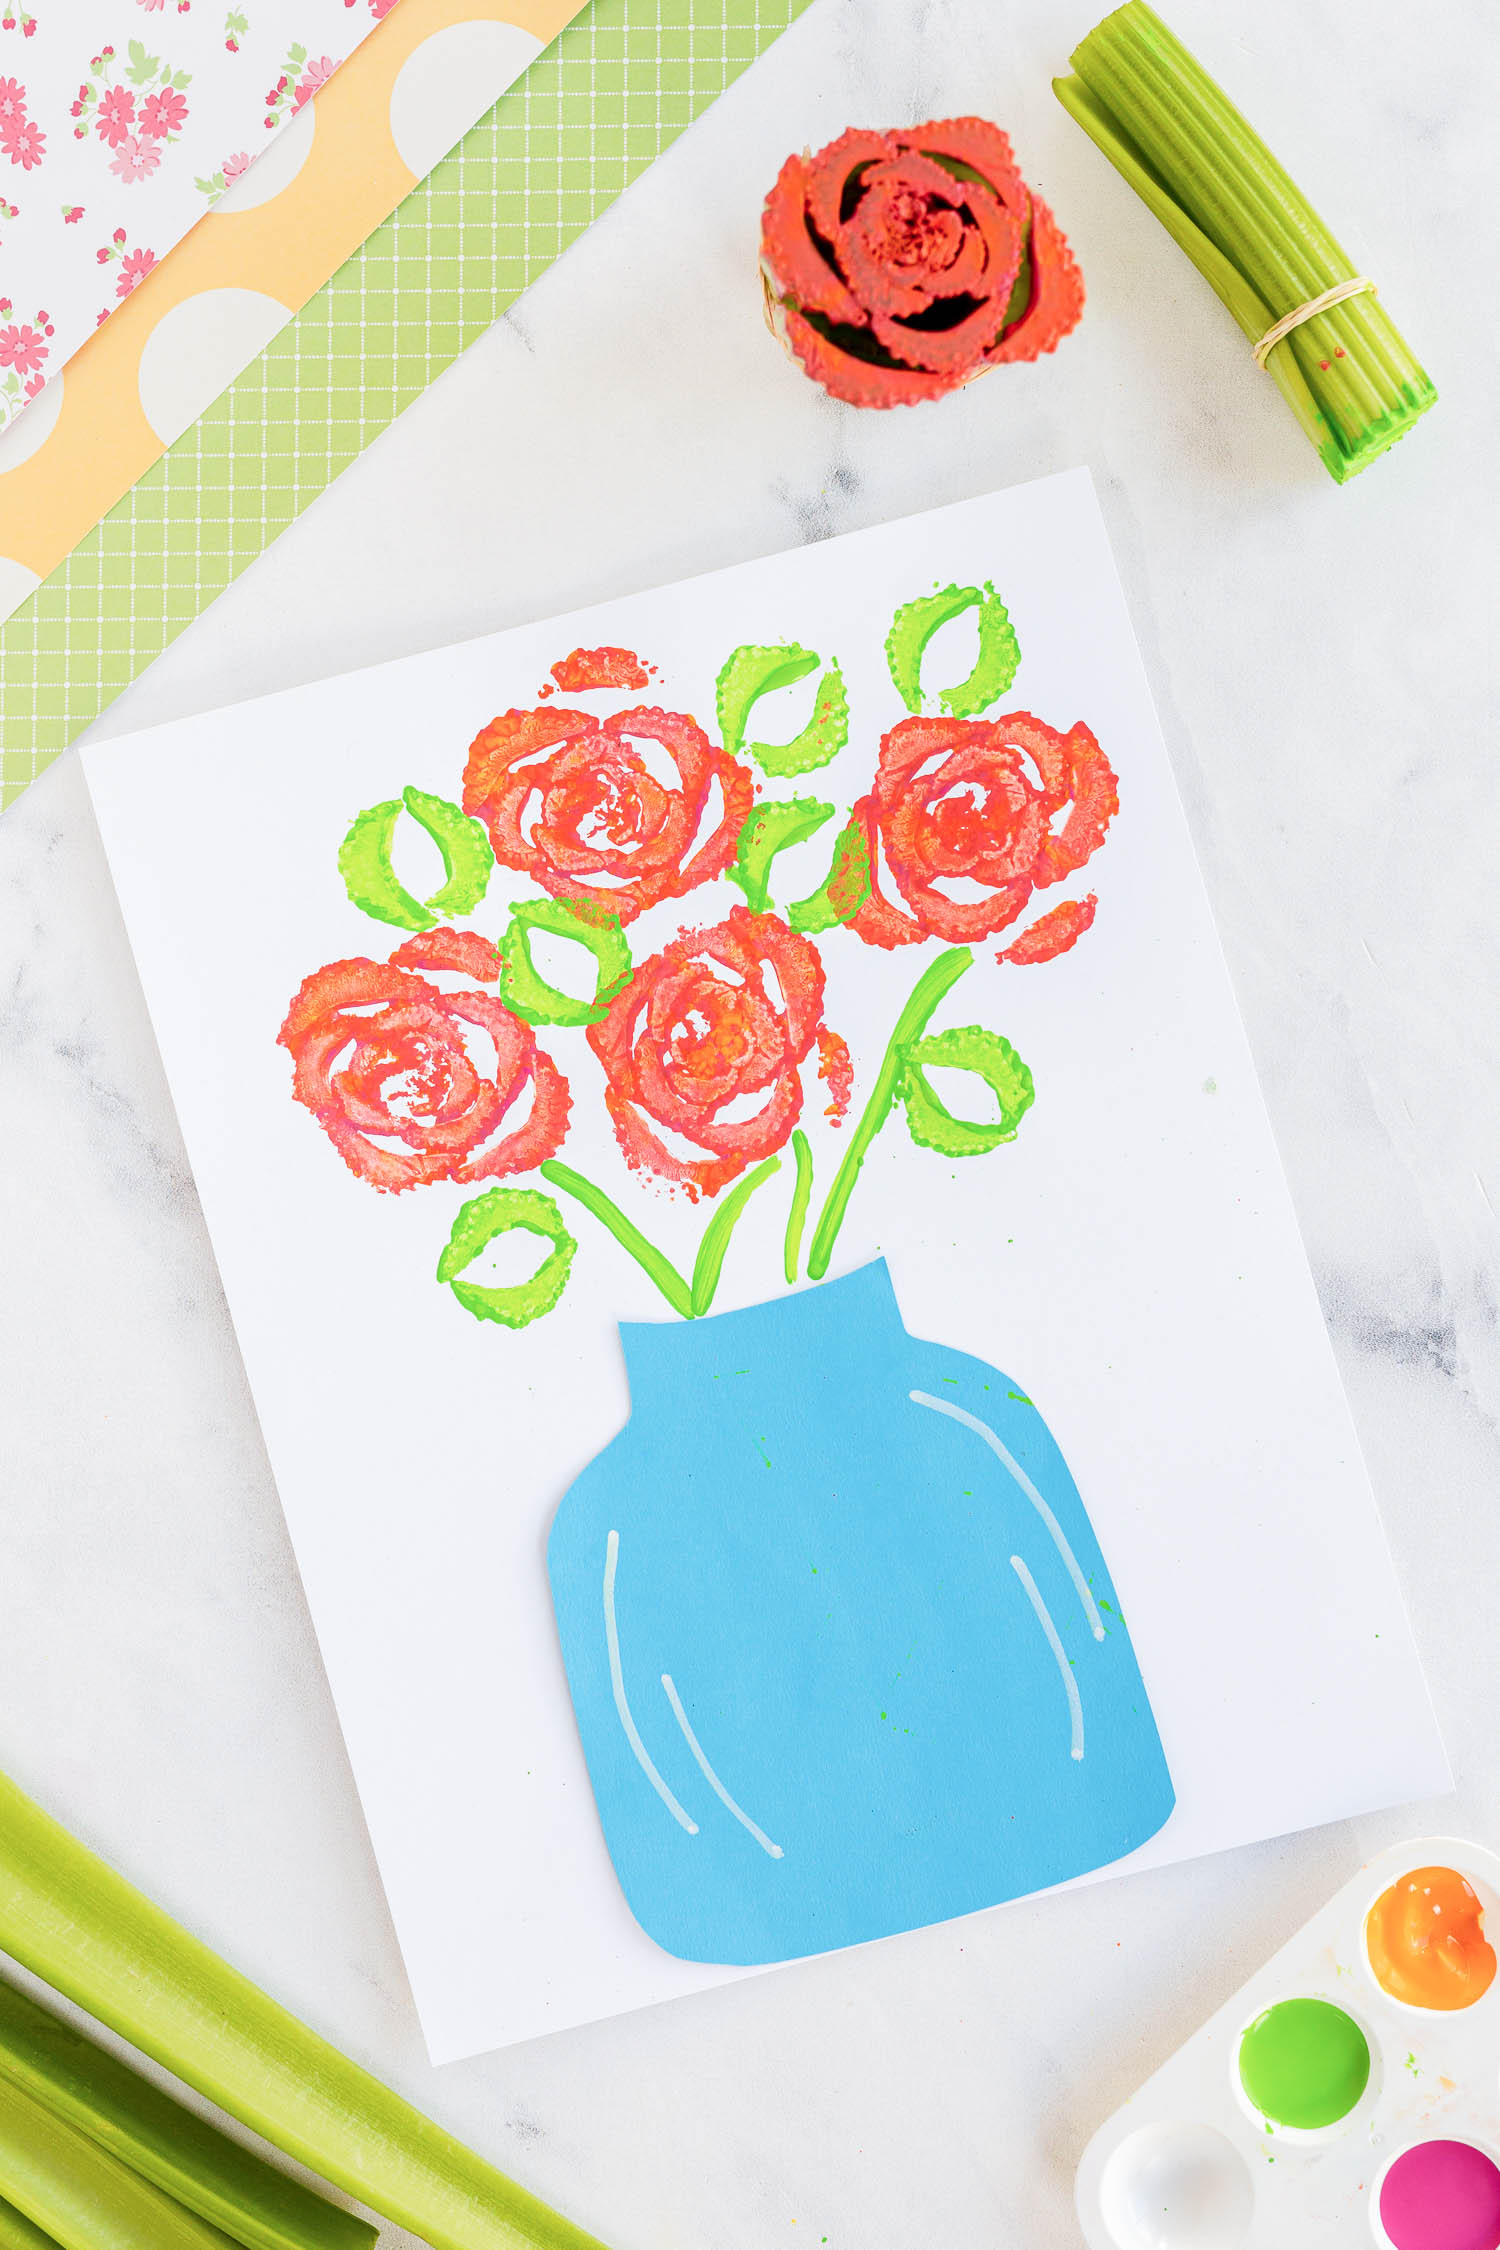  These Celery Stamped Flowers are super simple to create using paint and celery sticks! It's a fun activity using  a new medium to paint pretty flowers!